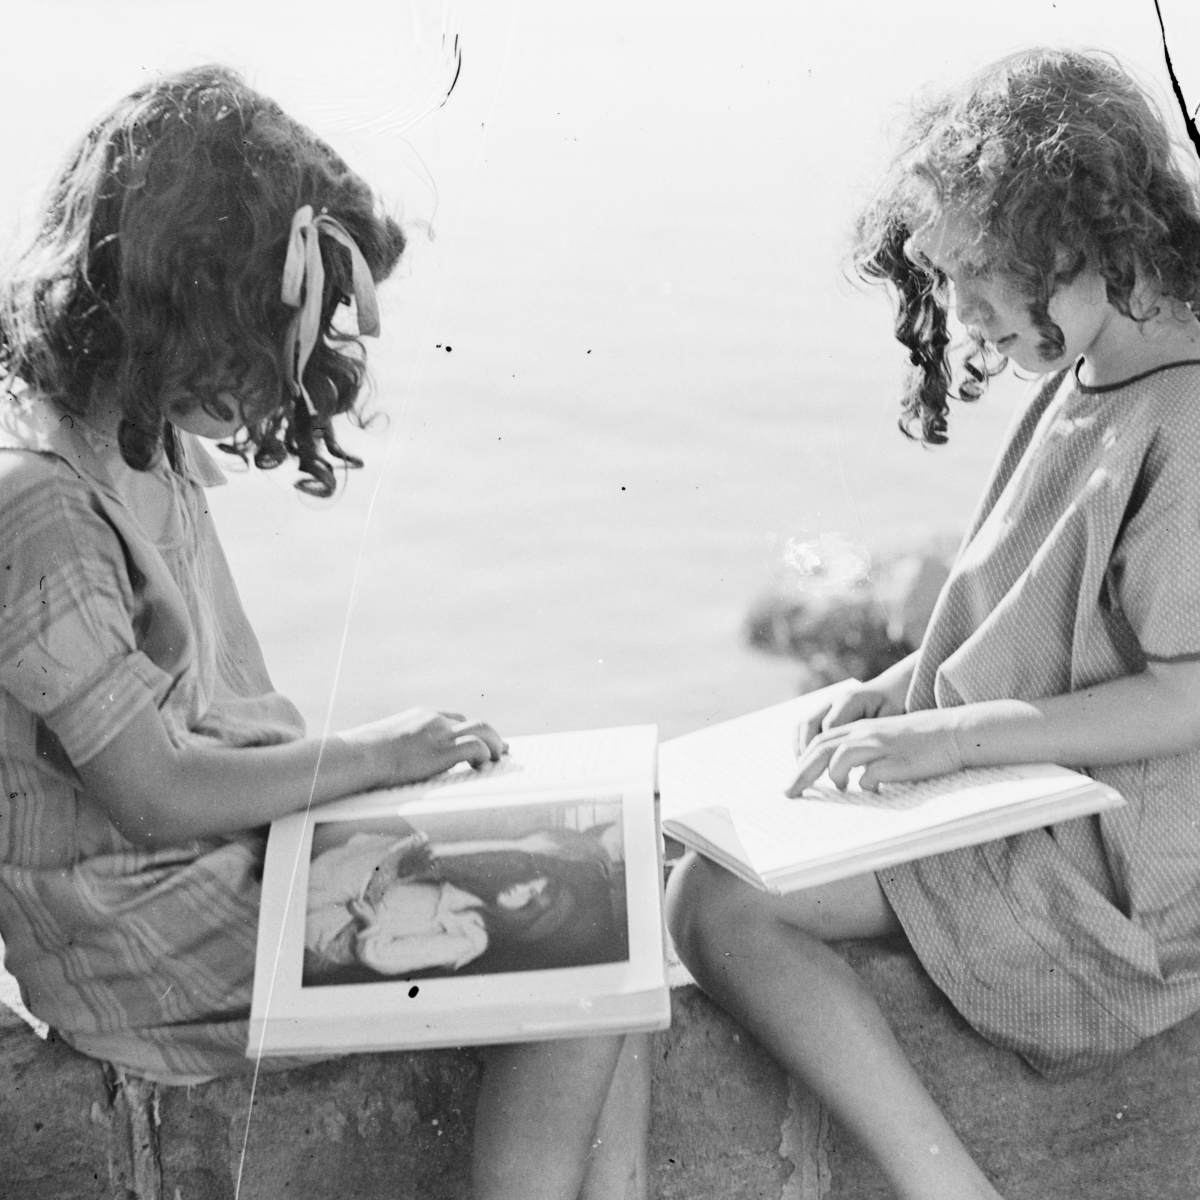 Two girls sitting and reading